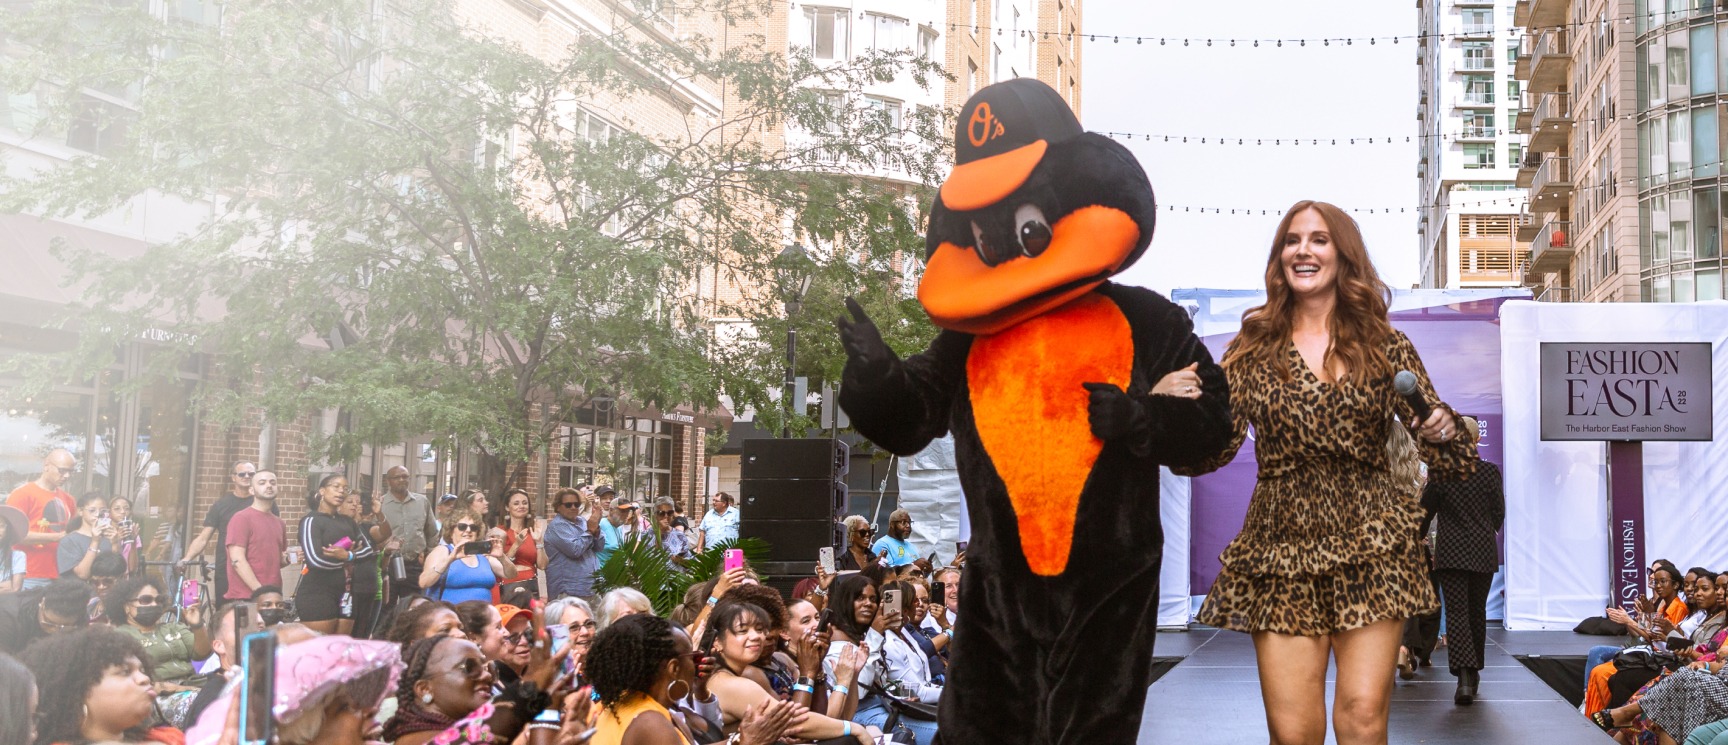 The Oriole Bird Mascot and a host strut down the outdoor runway at FashionEASTa 2022